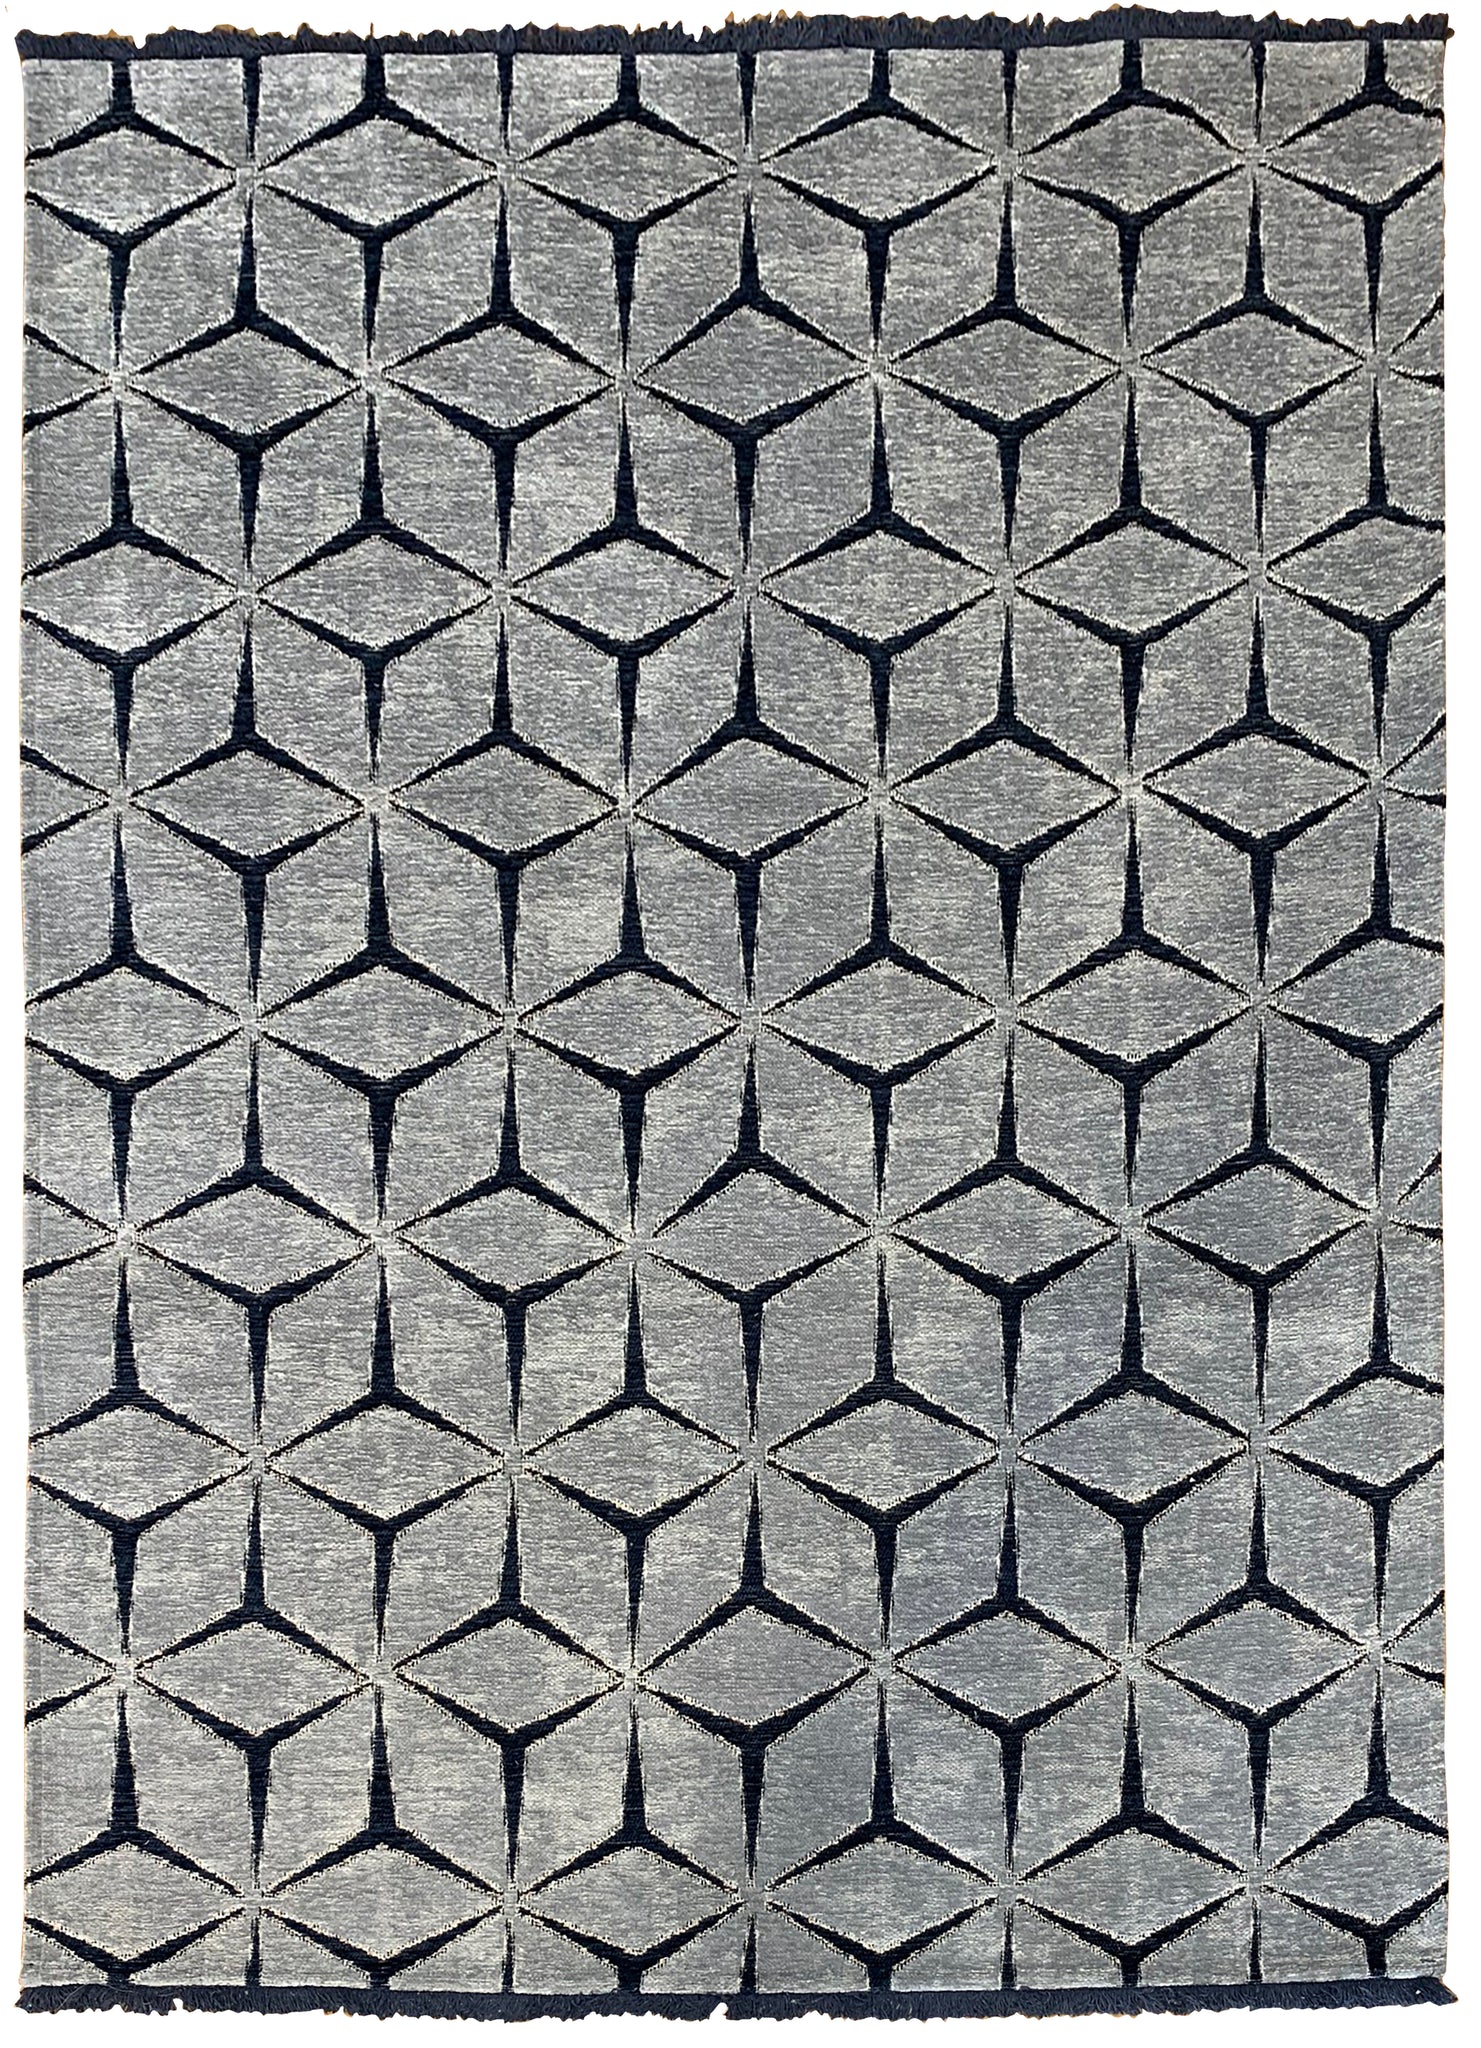 Washable Area rug | The Jacquard Lurex Diamond | Metallic Silver & Black | 5x8 | By MotherRuggers.com | Machine Washable | Jacquard Woven | Pet Friendly | Kid Friendly | Machine Wash | Line Dry | Living Room | Kitchen | Bedroom | High-Traffic | Anti-Slip | Three-year warranty with proper care | Shake or light Vacuum | Machine Wash as needed | Dry Flat or Line Dry | Dries fast